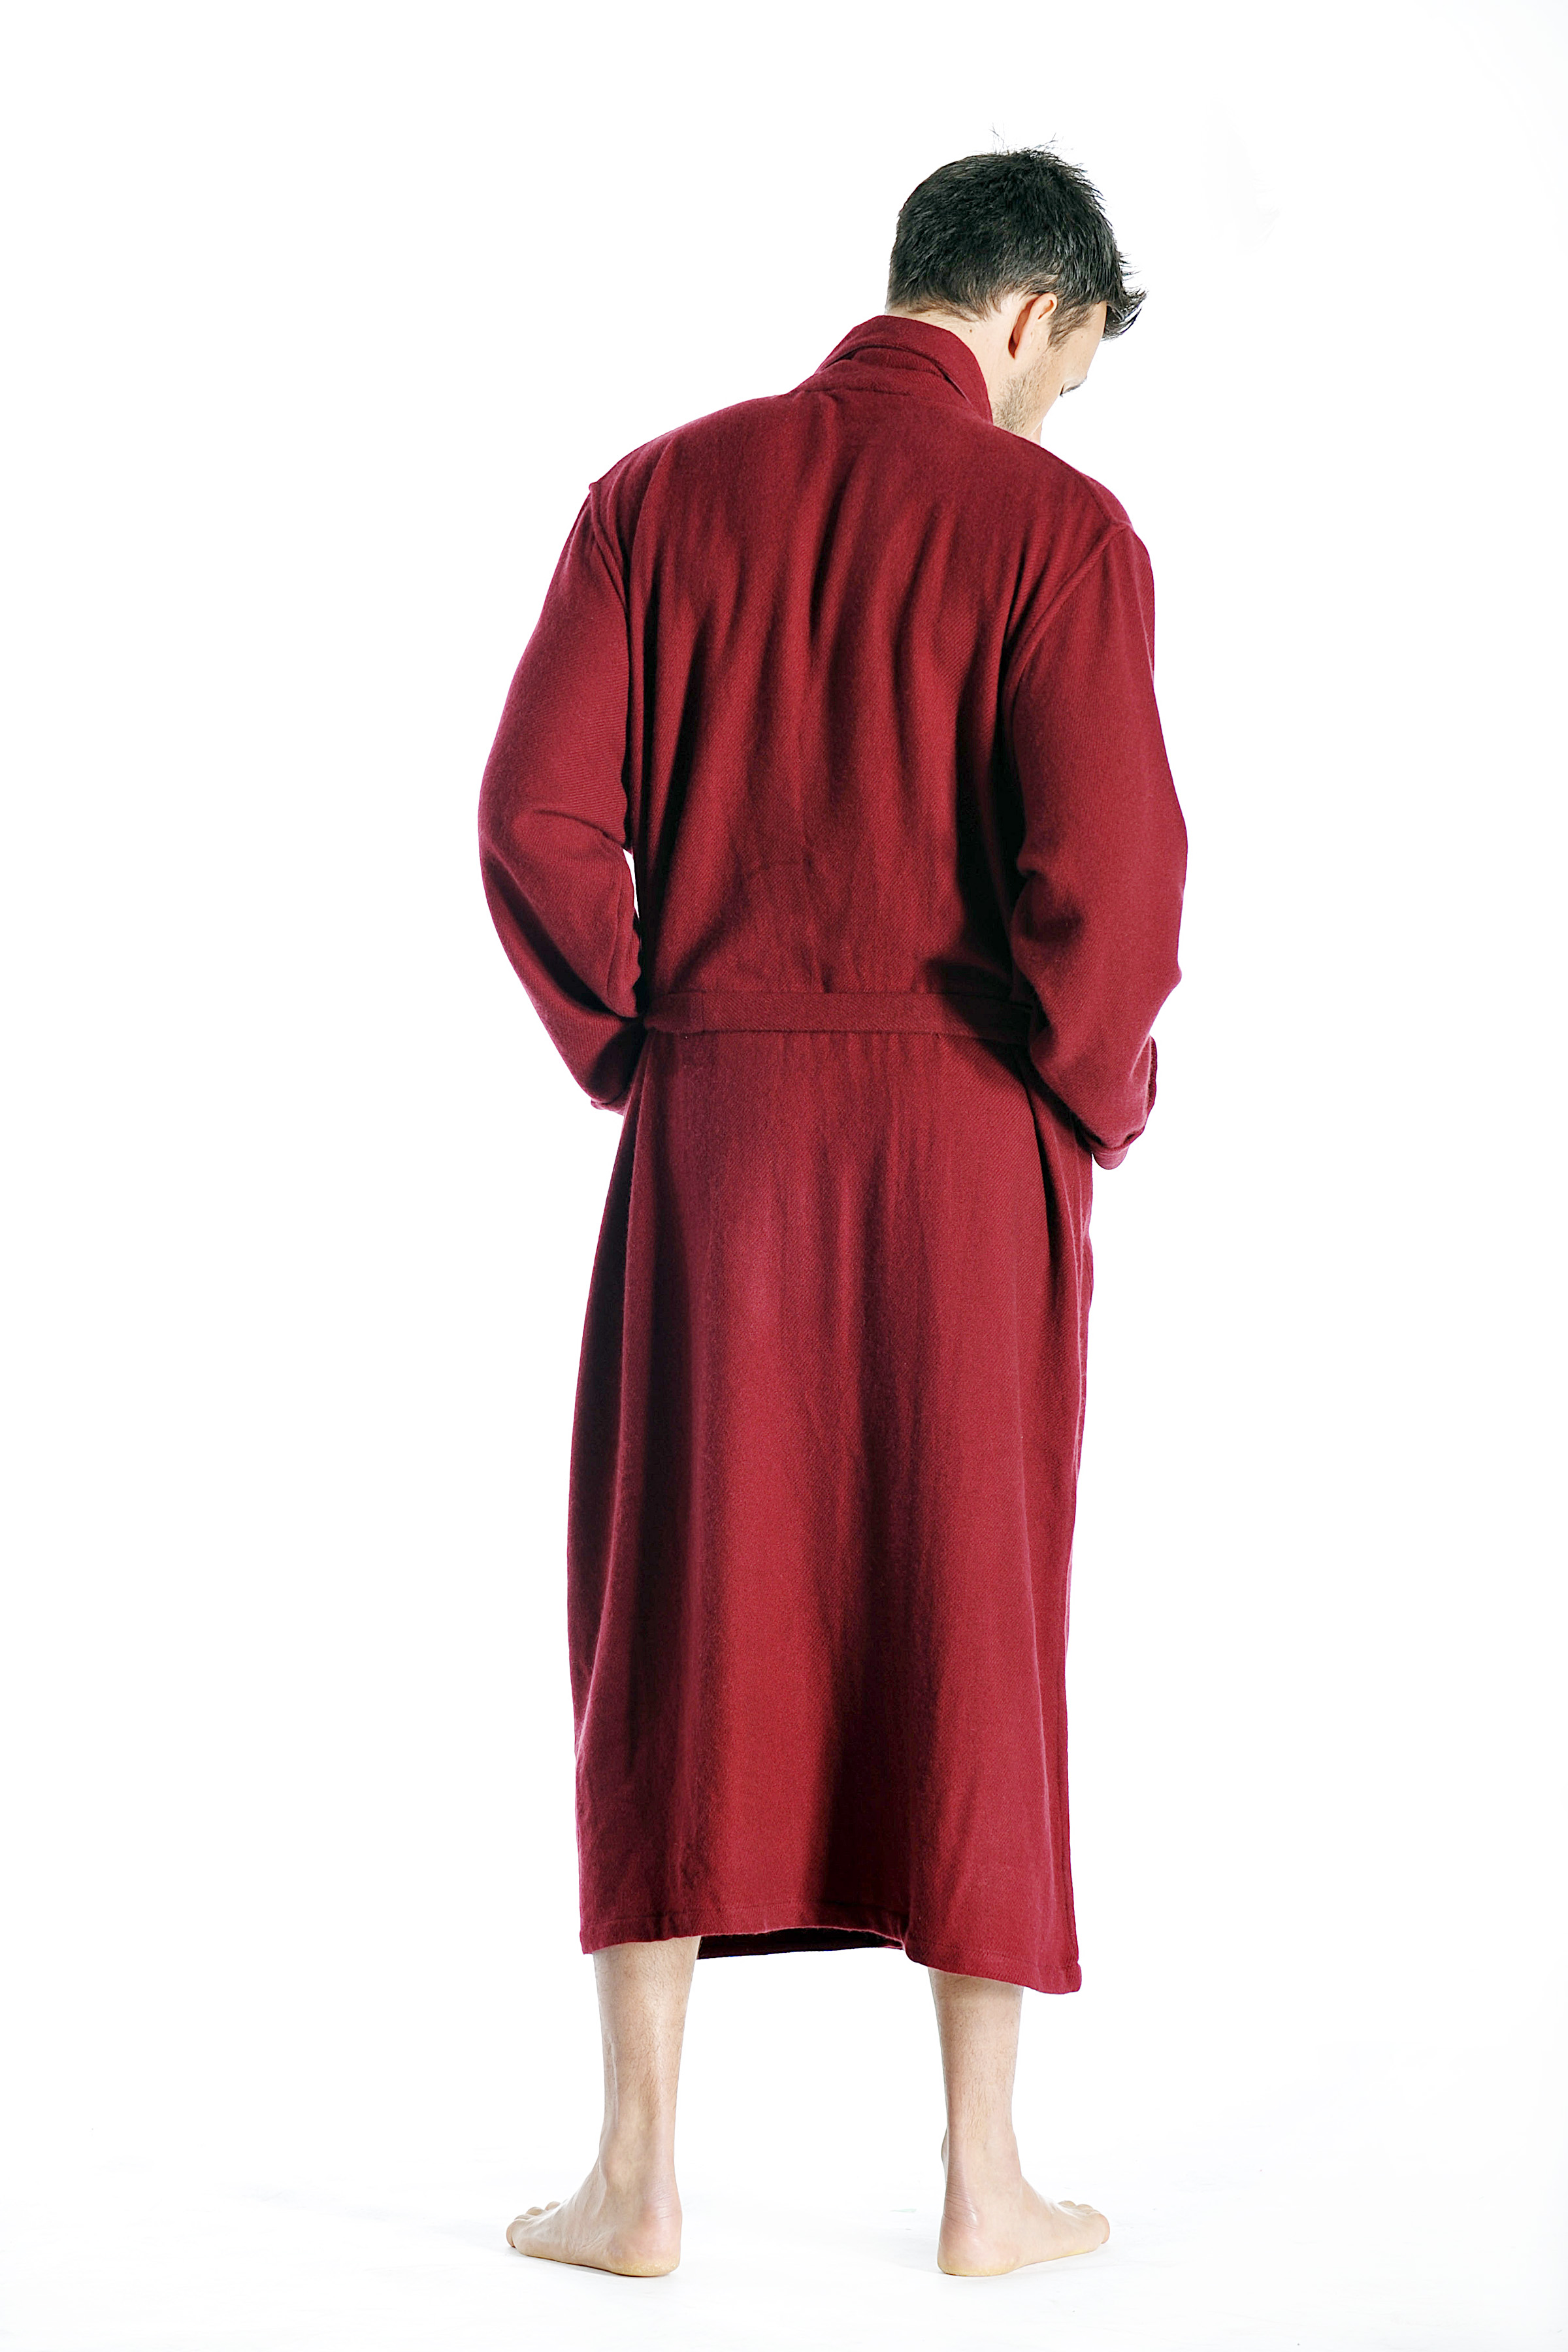 Pure Cashmere Full Length Robe for Men (Black, Large/Extra Large)